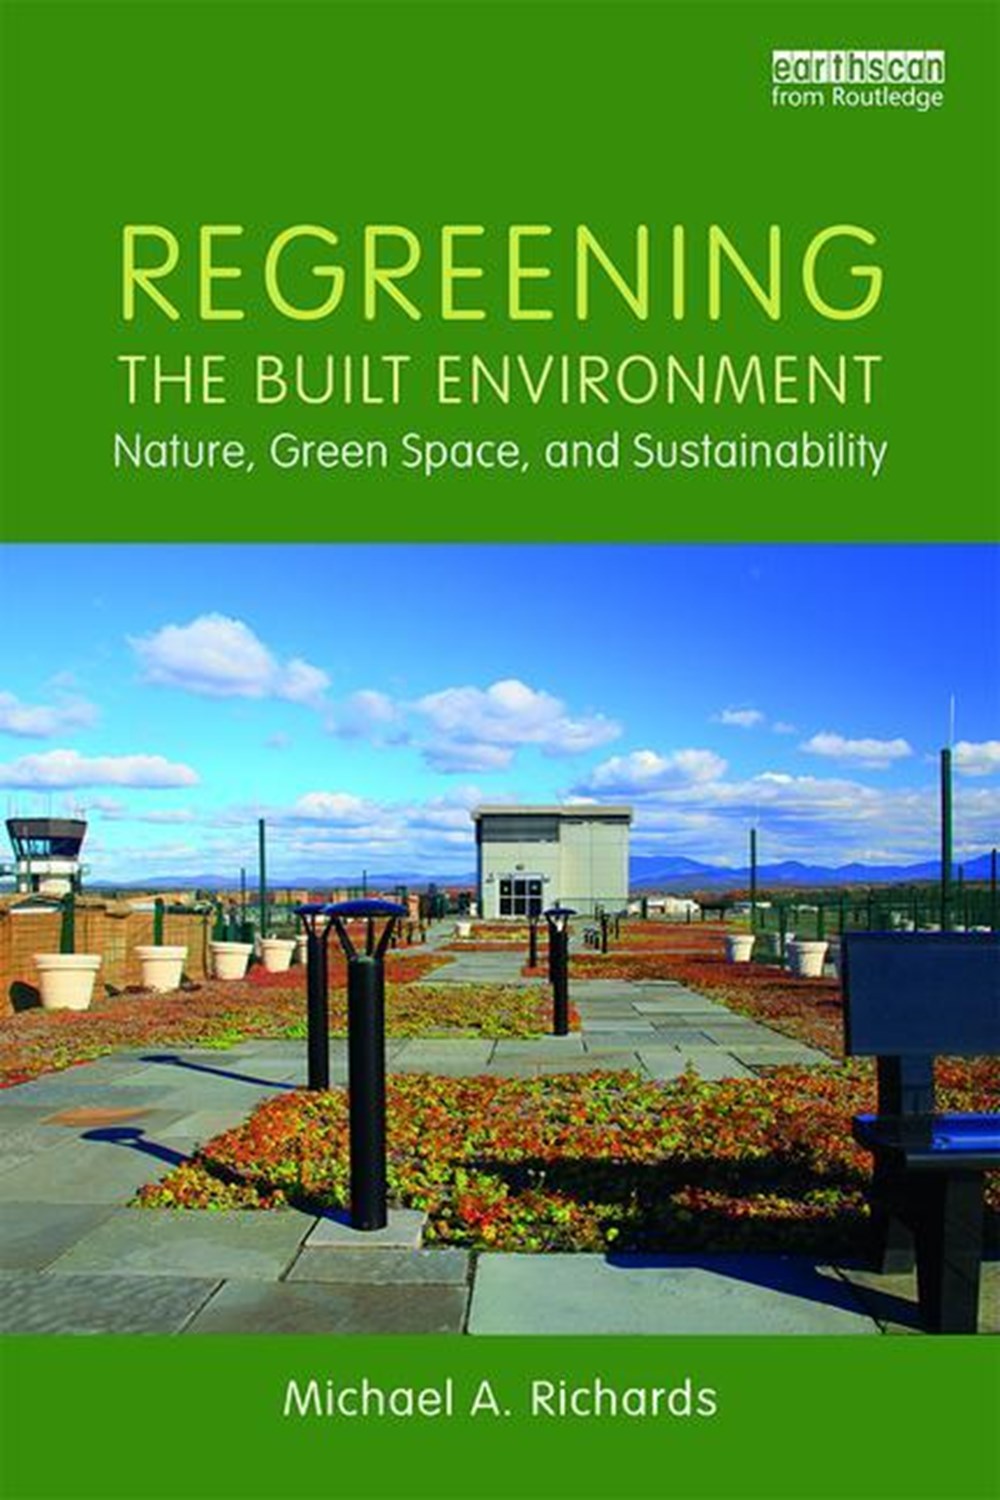 Regreening the Built Environment: Nature, Green Space, and Sustainability